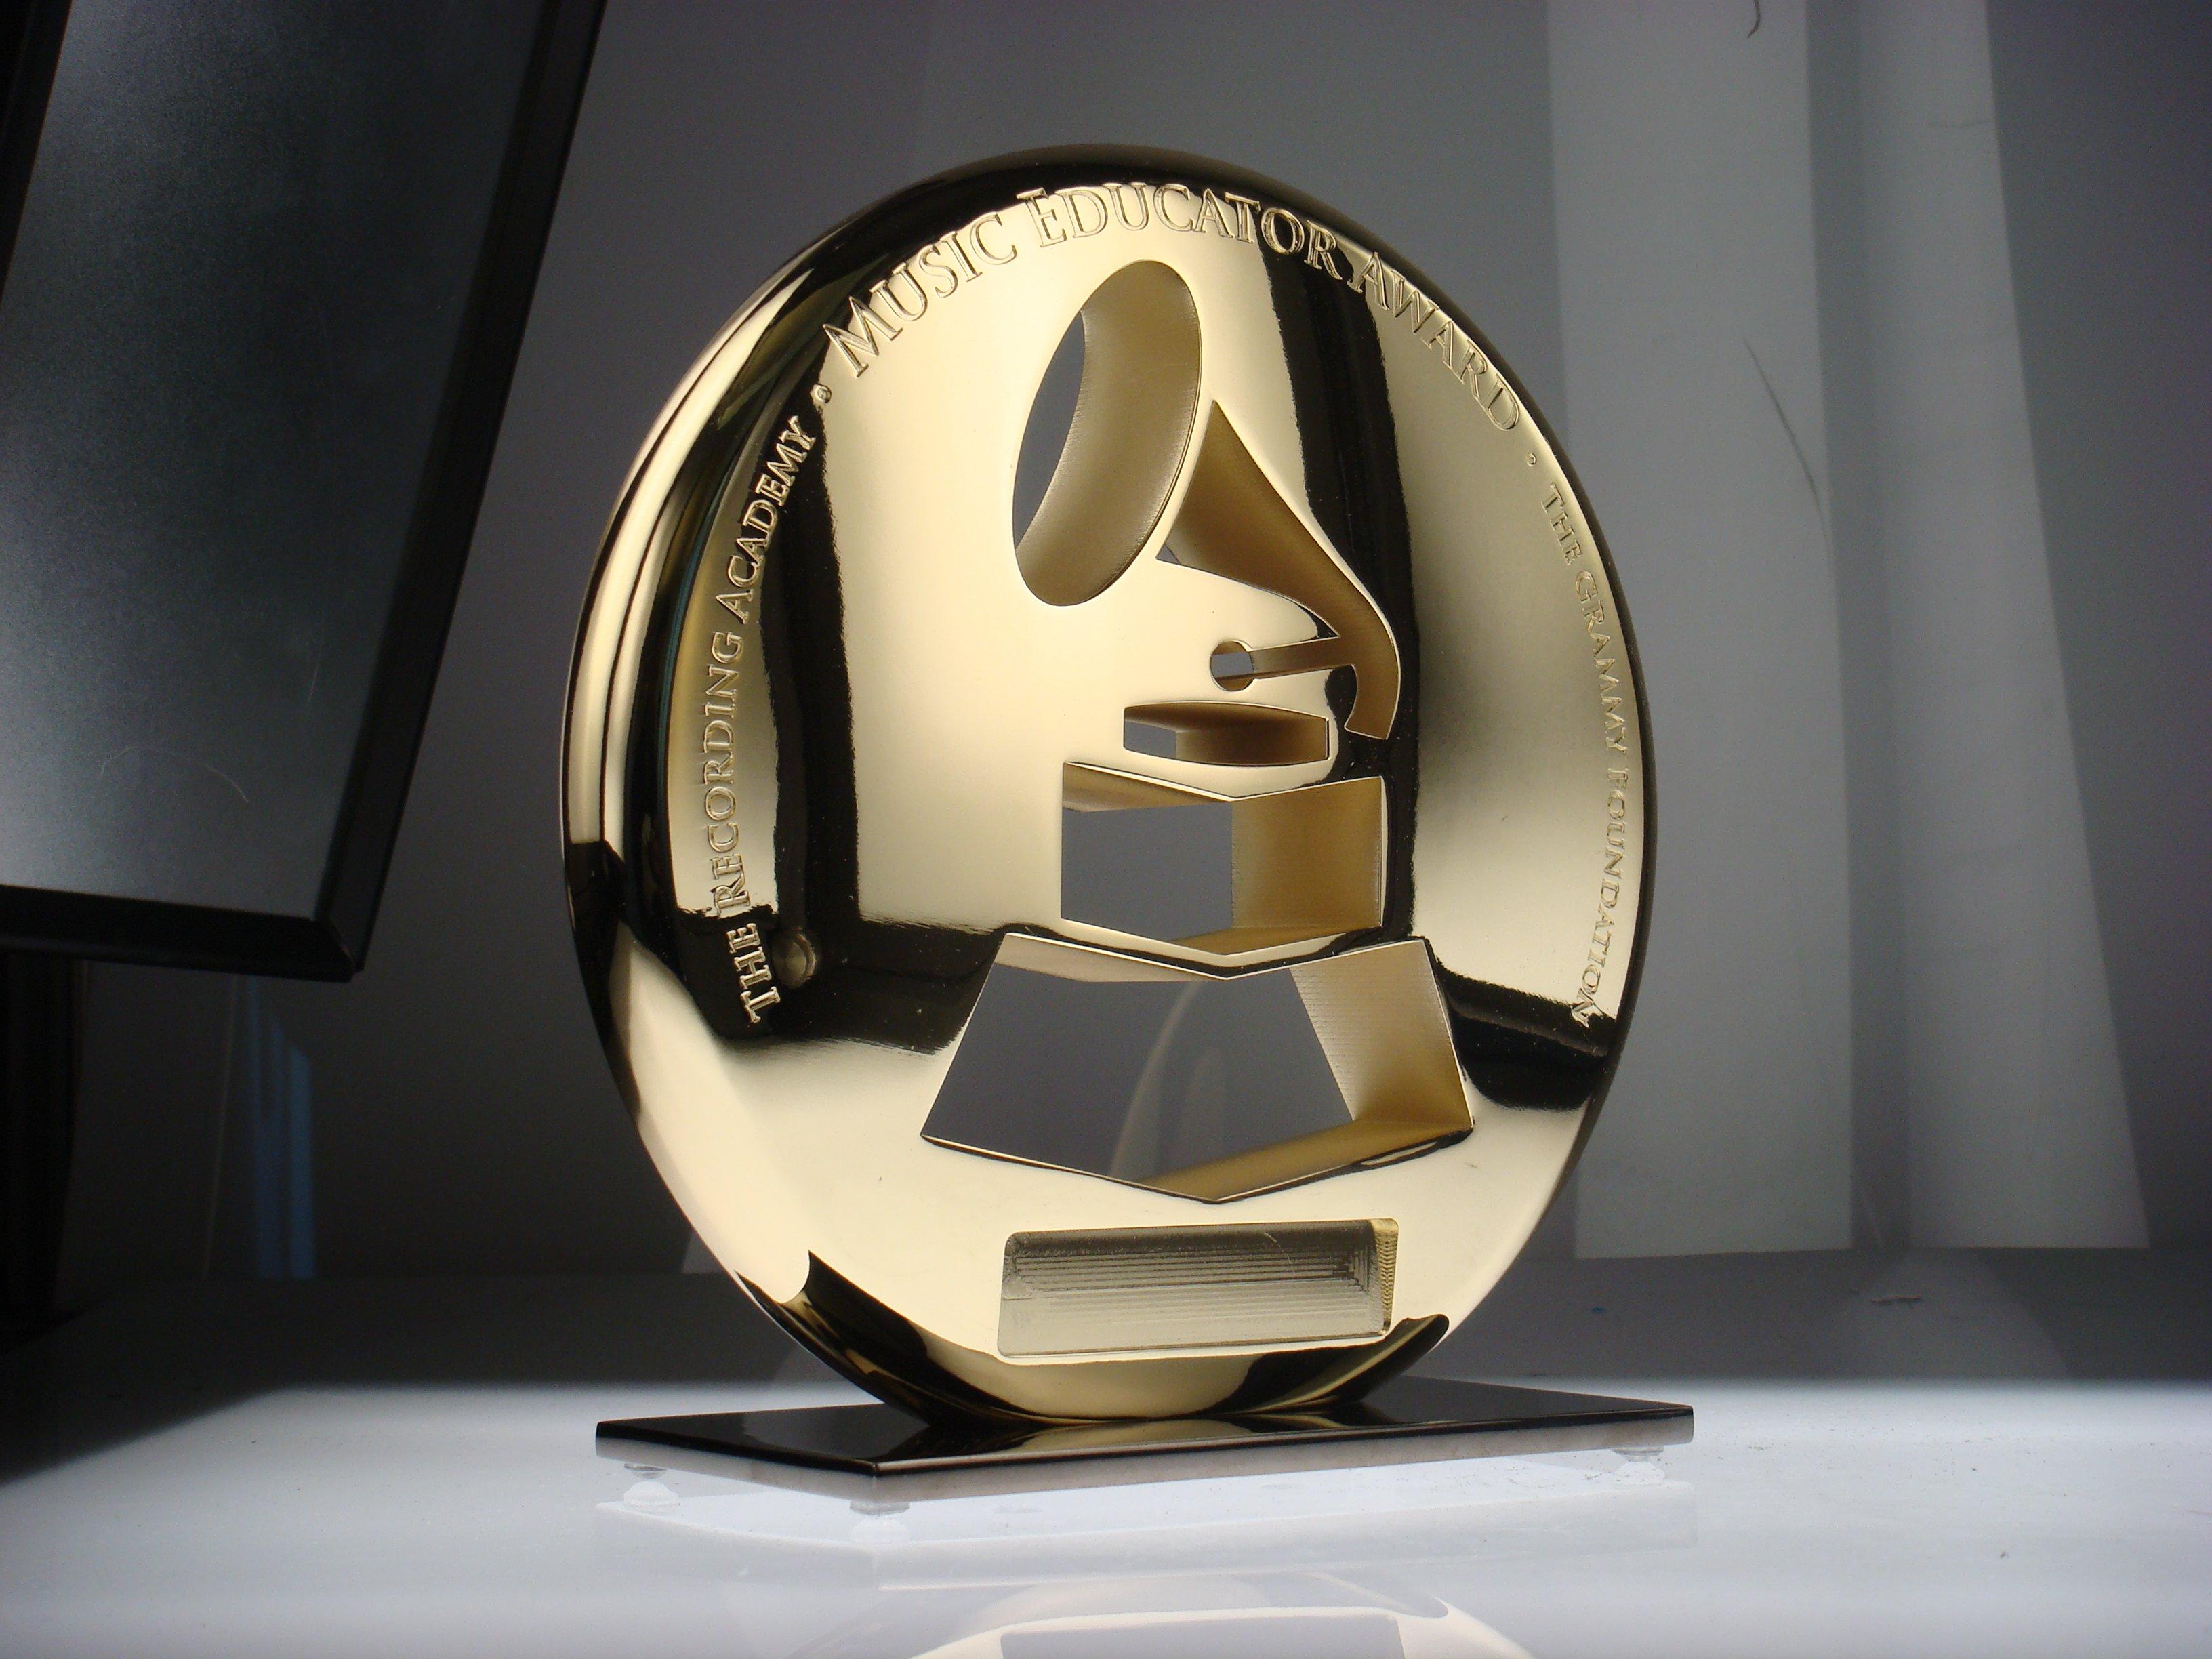 The Recording Academy and GRAMMY Museum's Music Educator Award